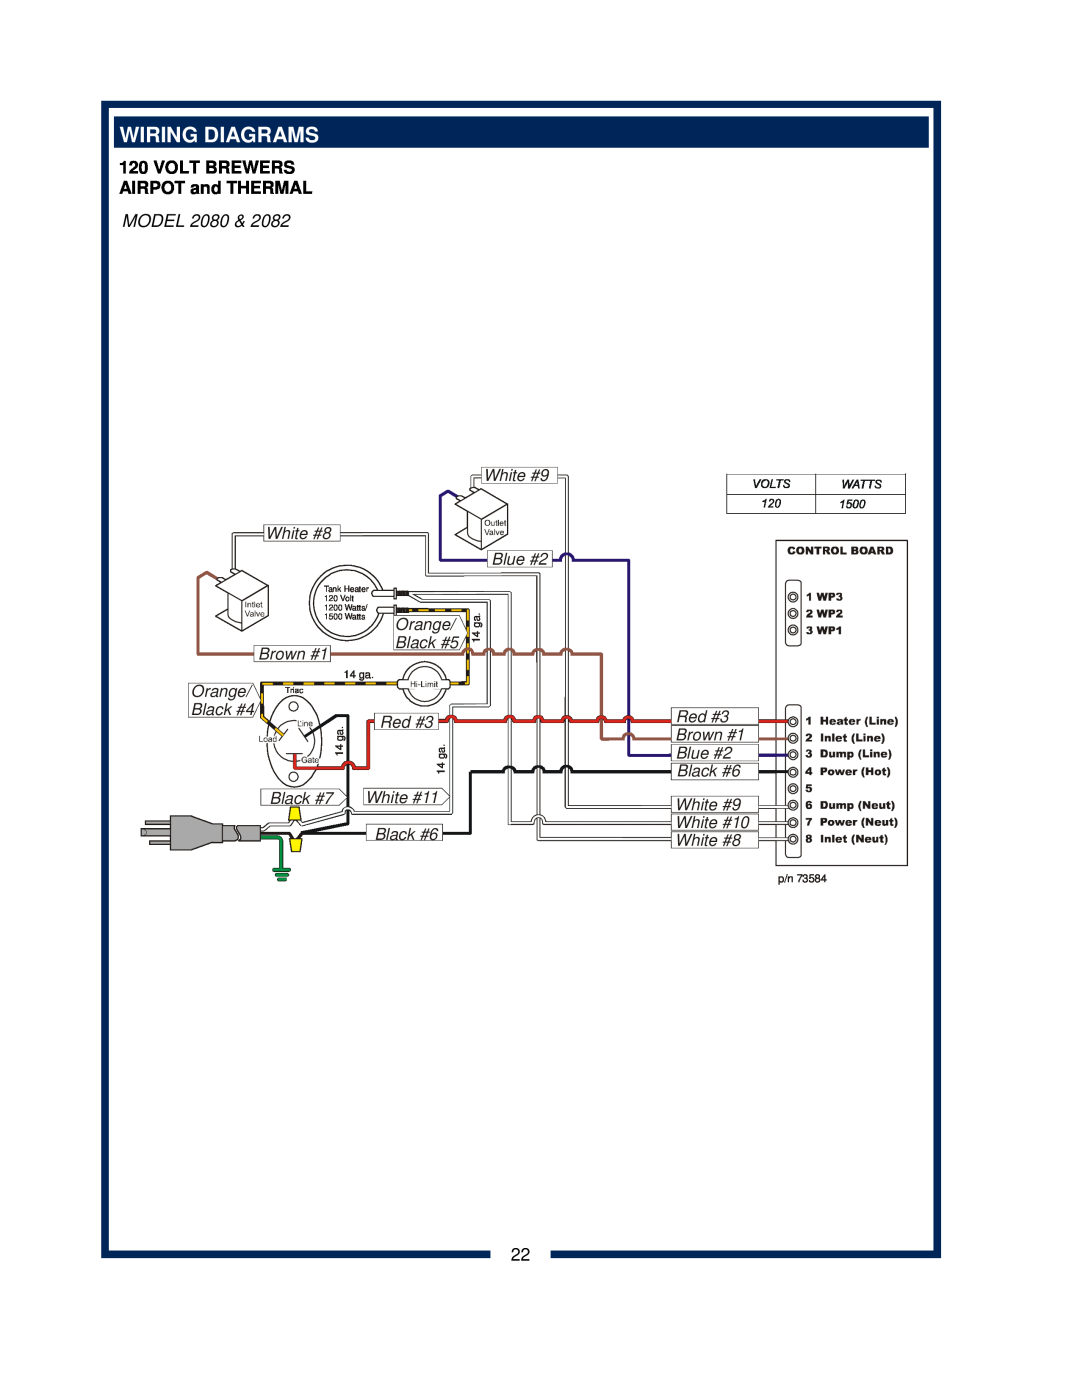 Bloomfield 2088EX, 2086EX, 2080, 2082 owner manual Wiring Diagrams, Volt Brewers, AIRPOT and THERMAL 